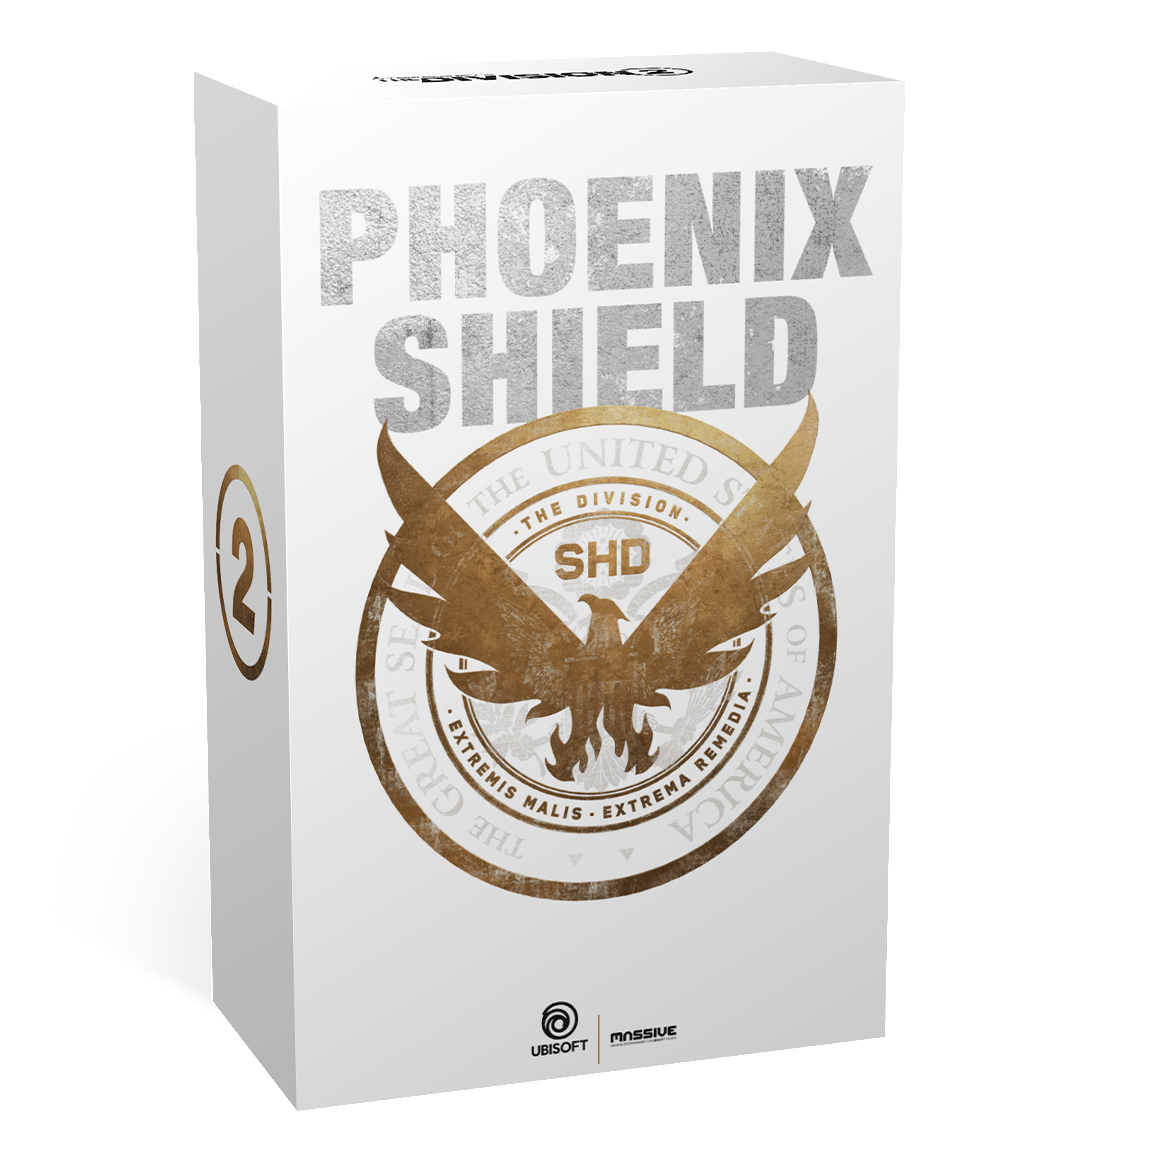 Division The [PlayStation Shield Edition - 2 Tom Clancy’s - 4] Phoenix